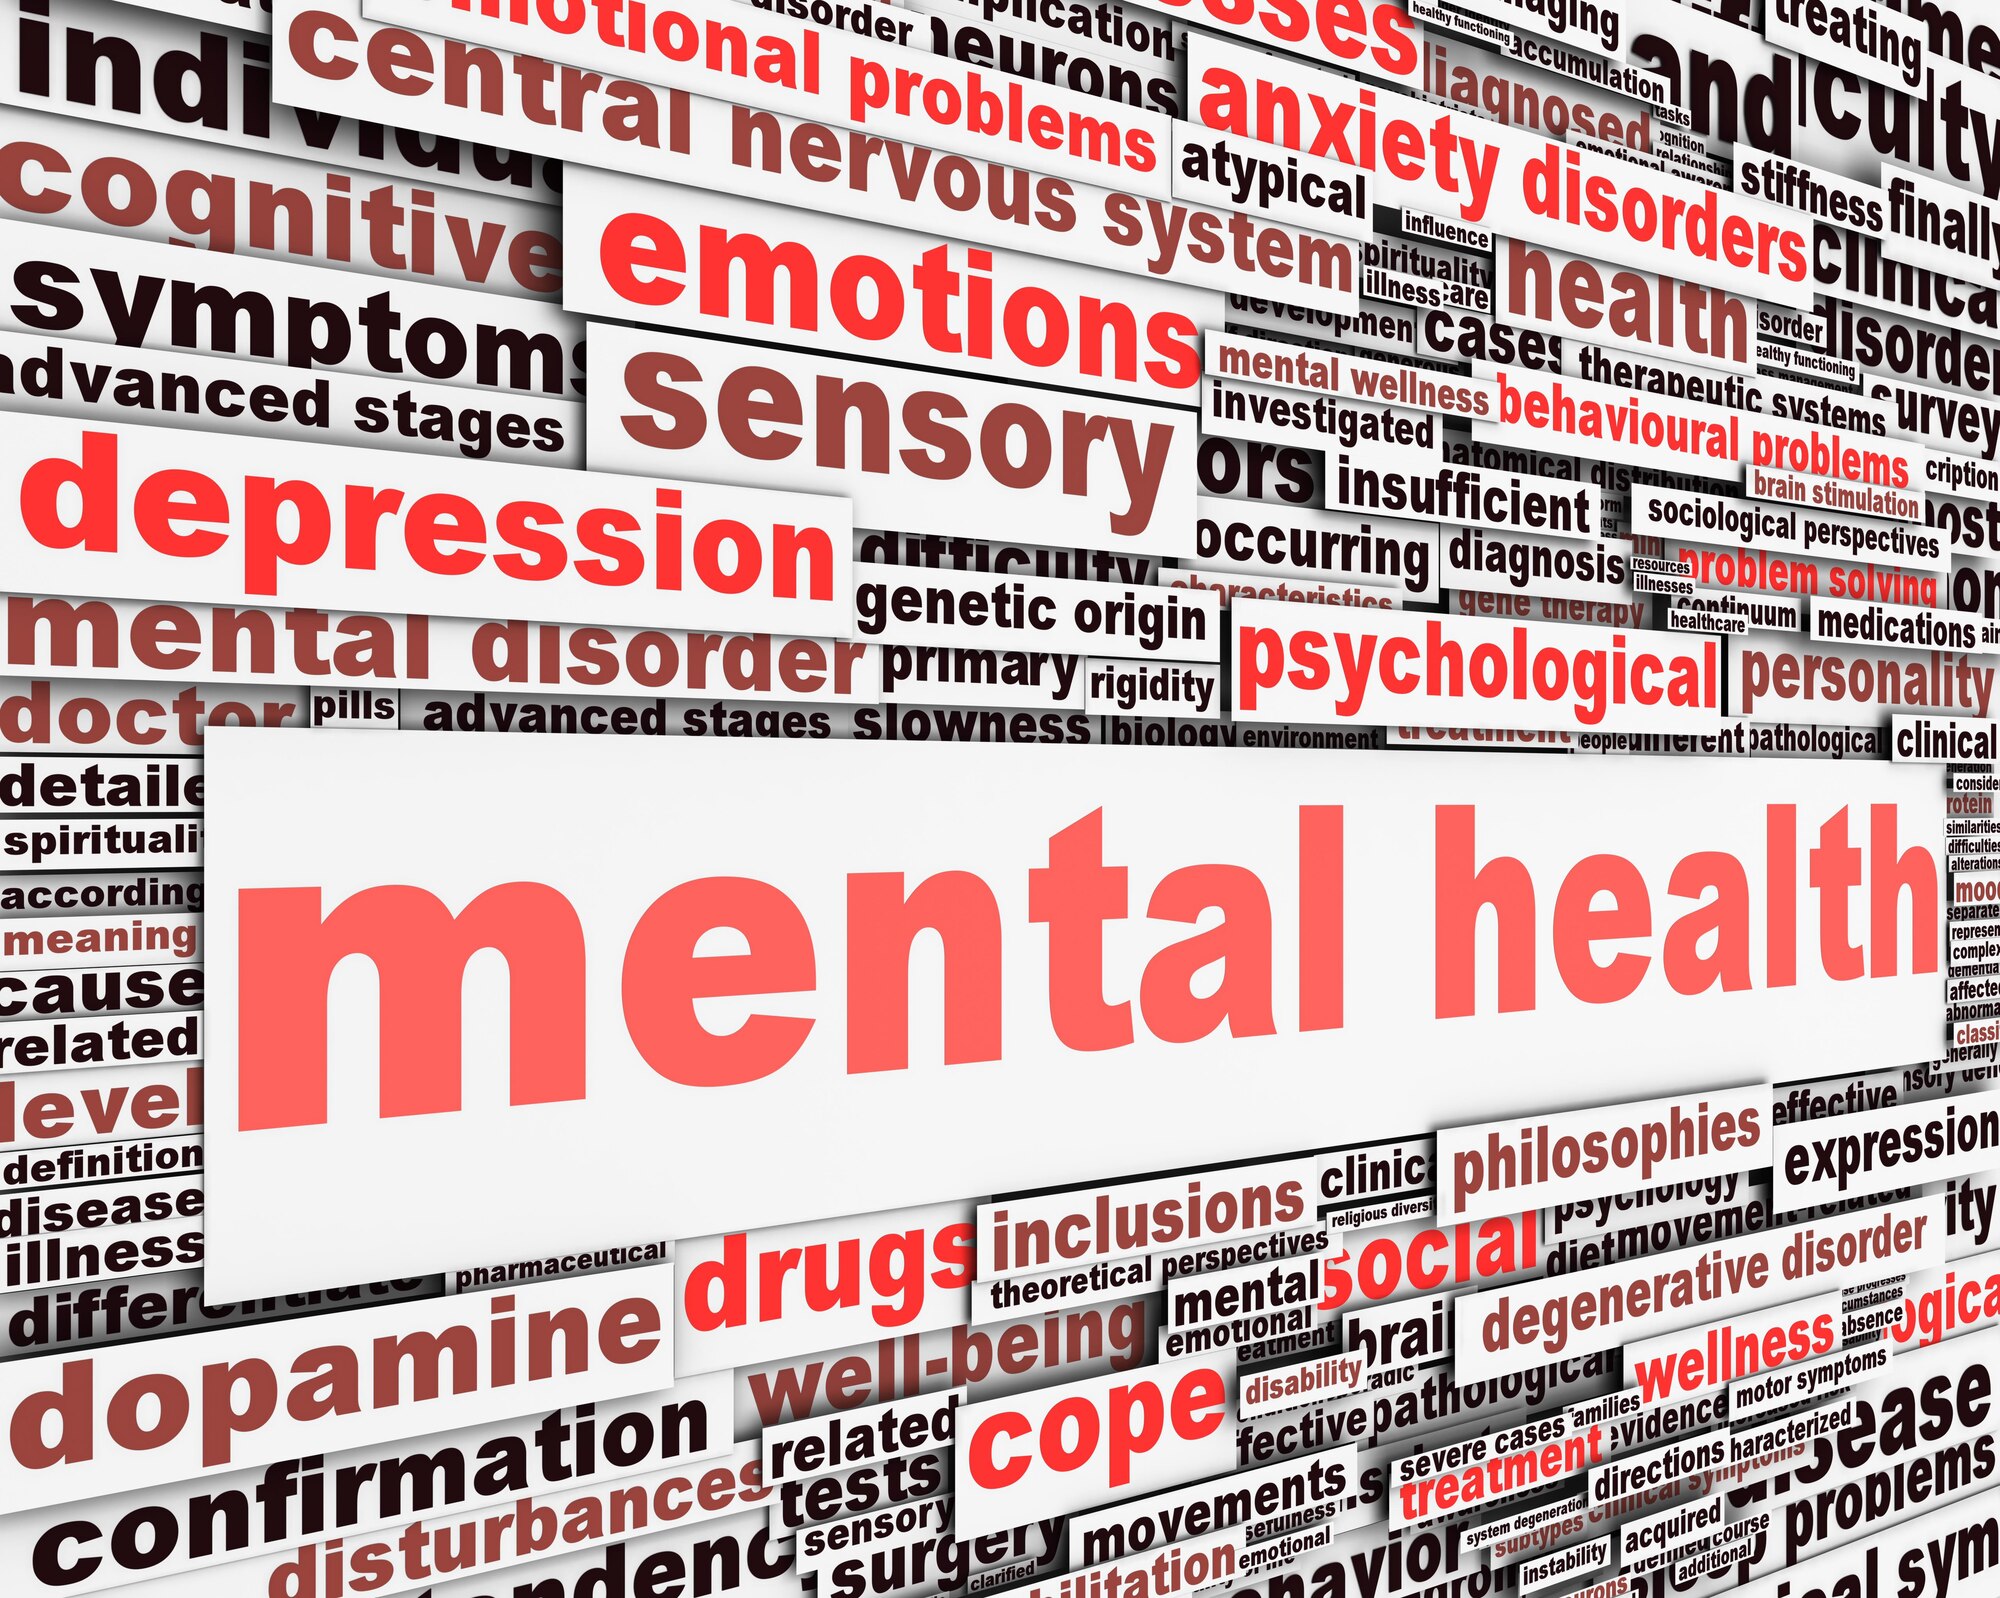 The Mental Health Flight is comprised of four different elements: Mental Health, Alcohol and Drug Abuse Prevention and Treatment Program, the Family Advocacy Clinic, and Resiliency and Prevention Program. (Shutterstock image)
